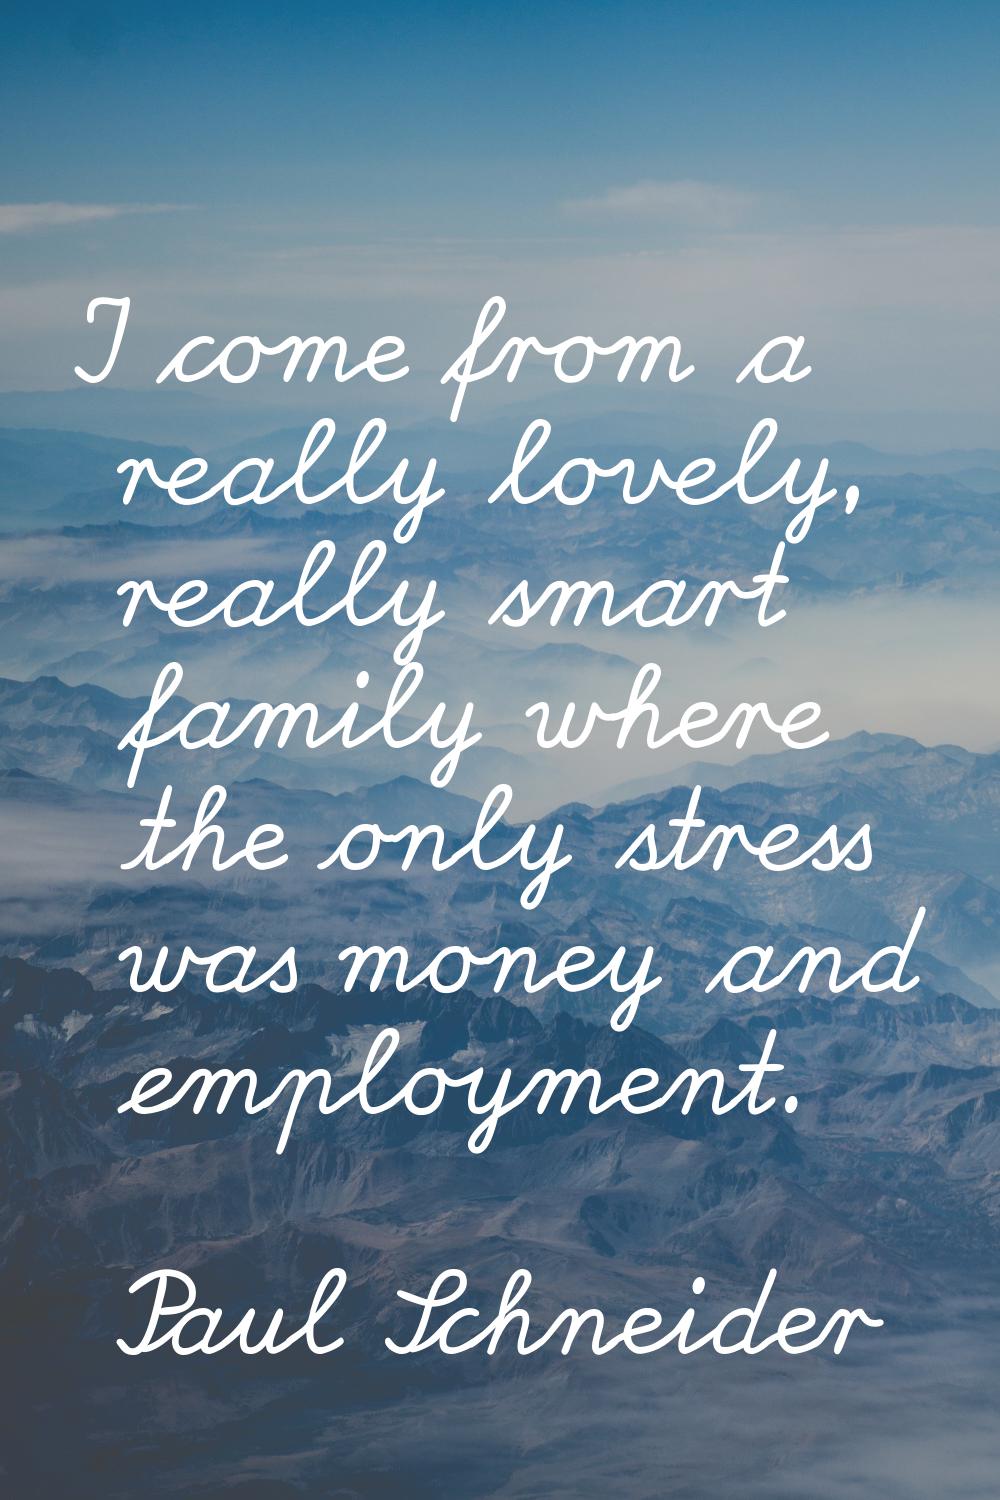 I come from a really lovely, really smart family where the only stress was money and employment.